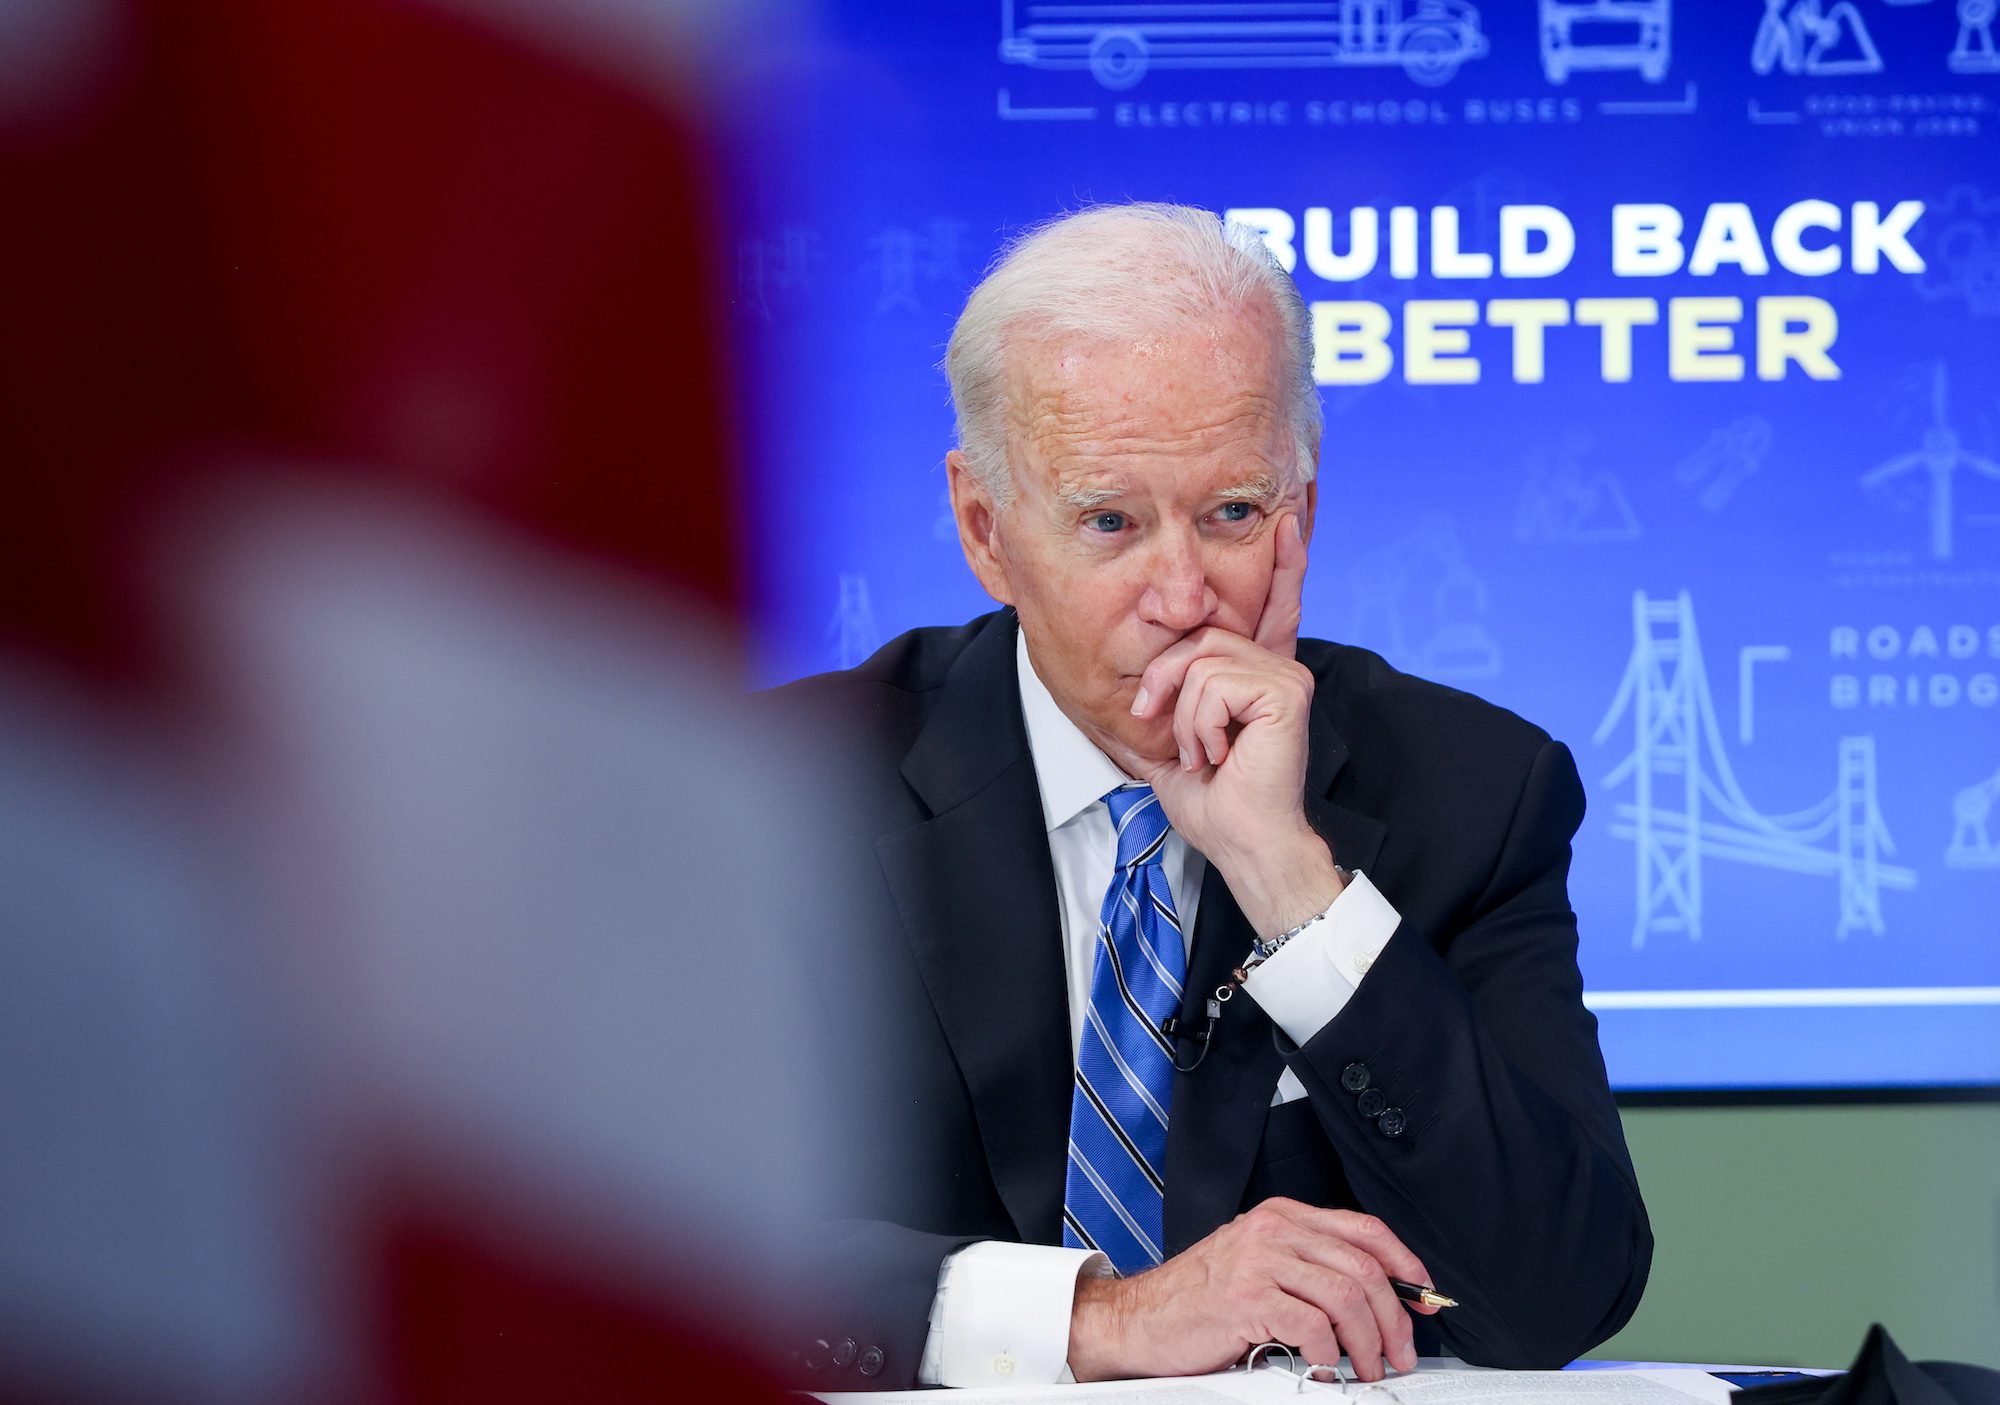 Biden Says His Administration is Working to Relieve Bottlenecks that Threaten Economic Recovery